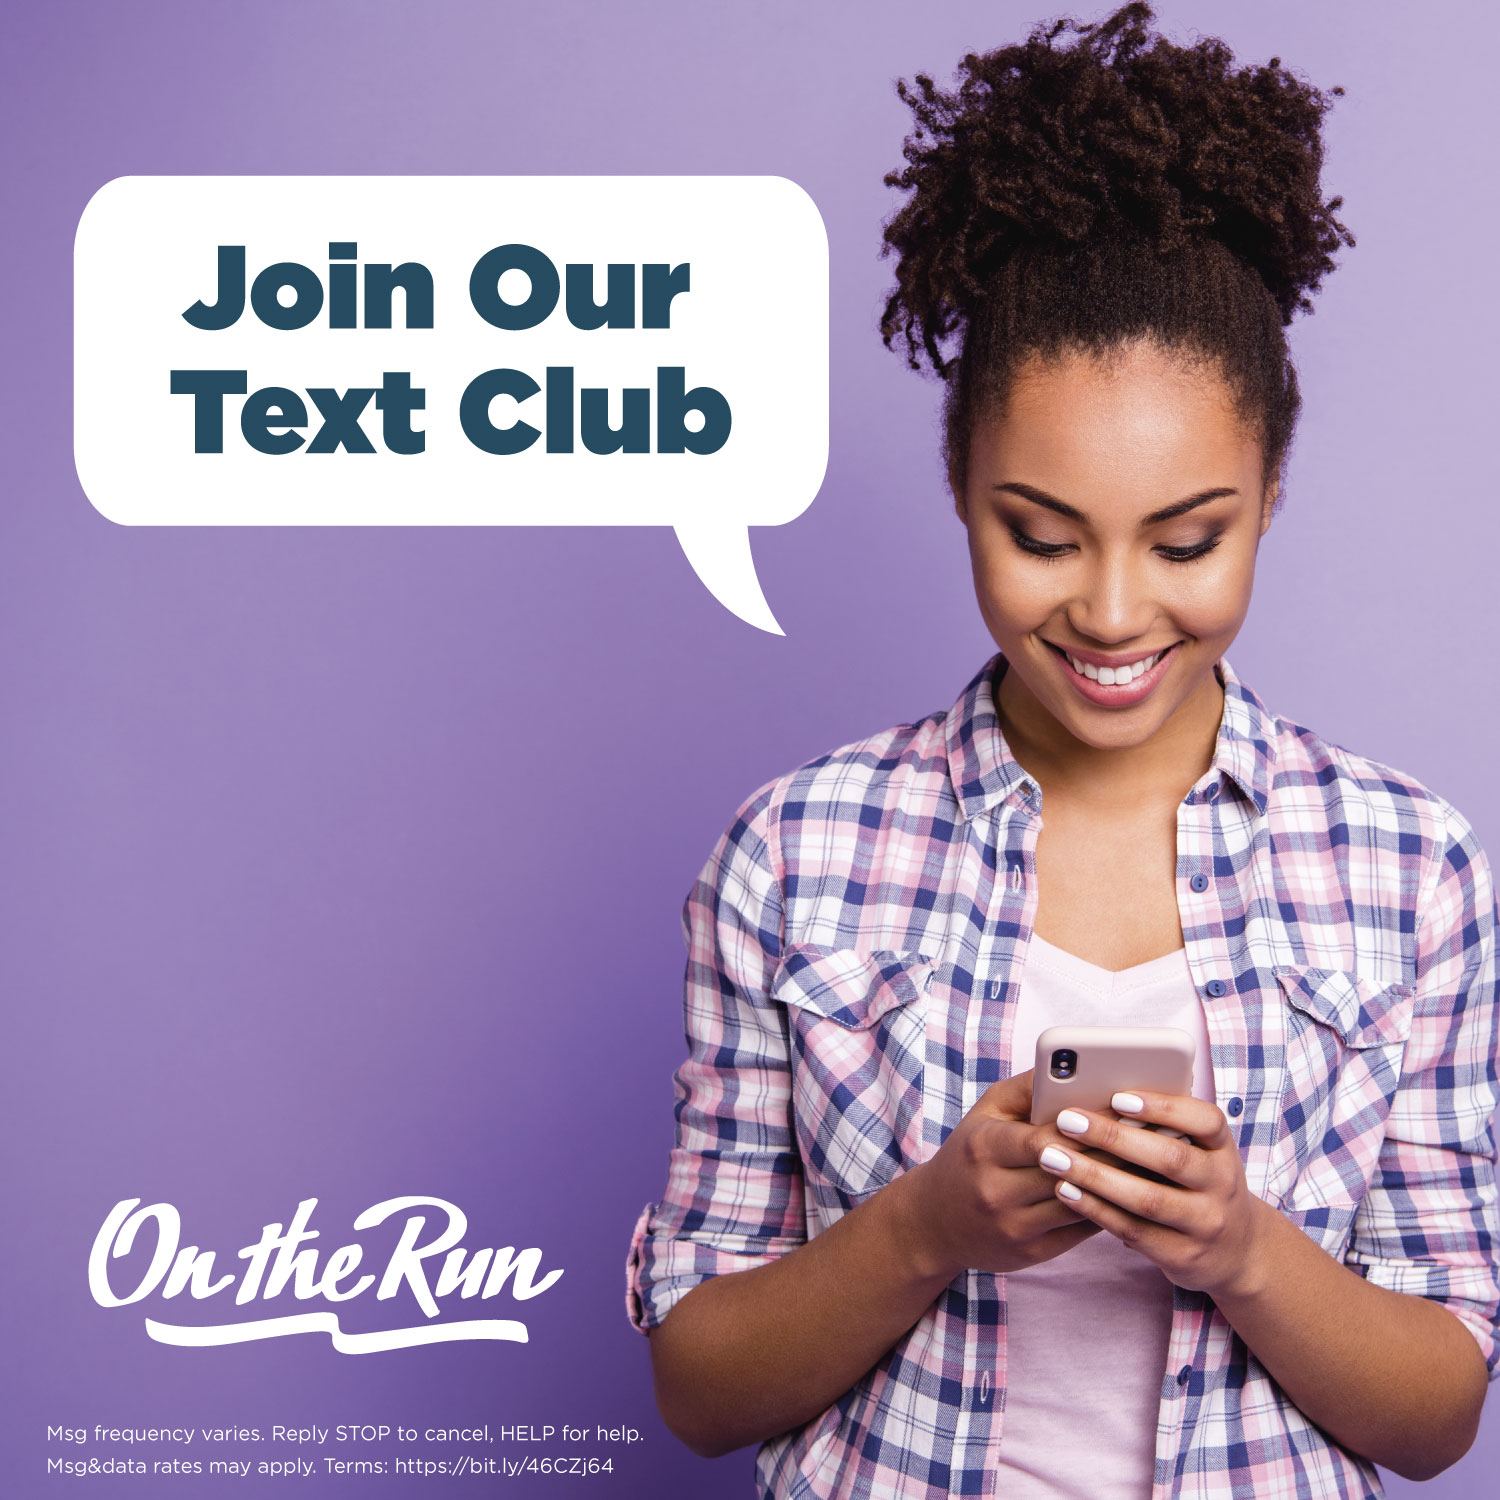 Join our VIP Text Club